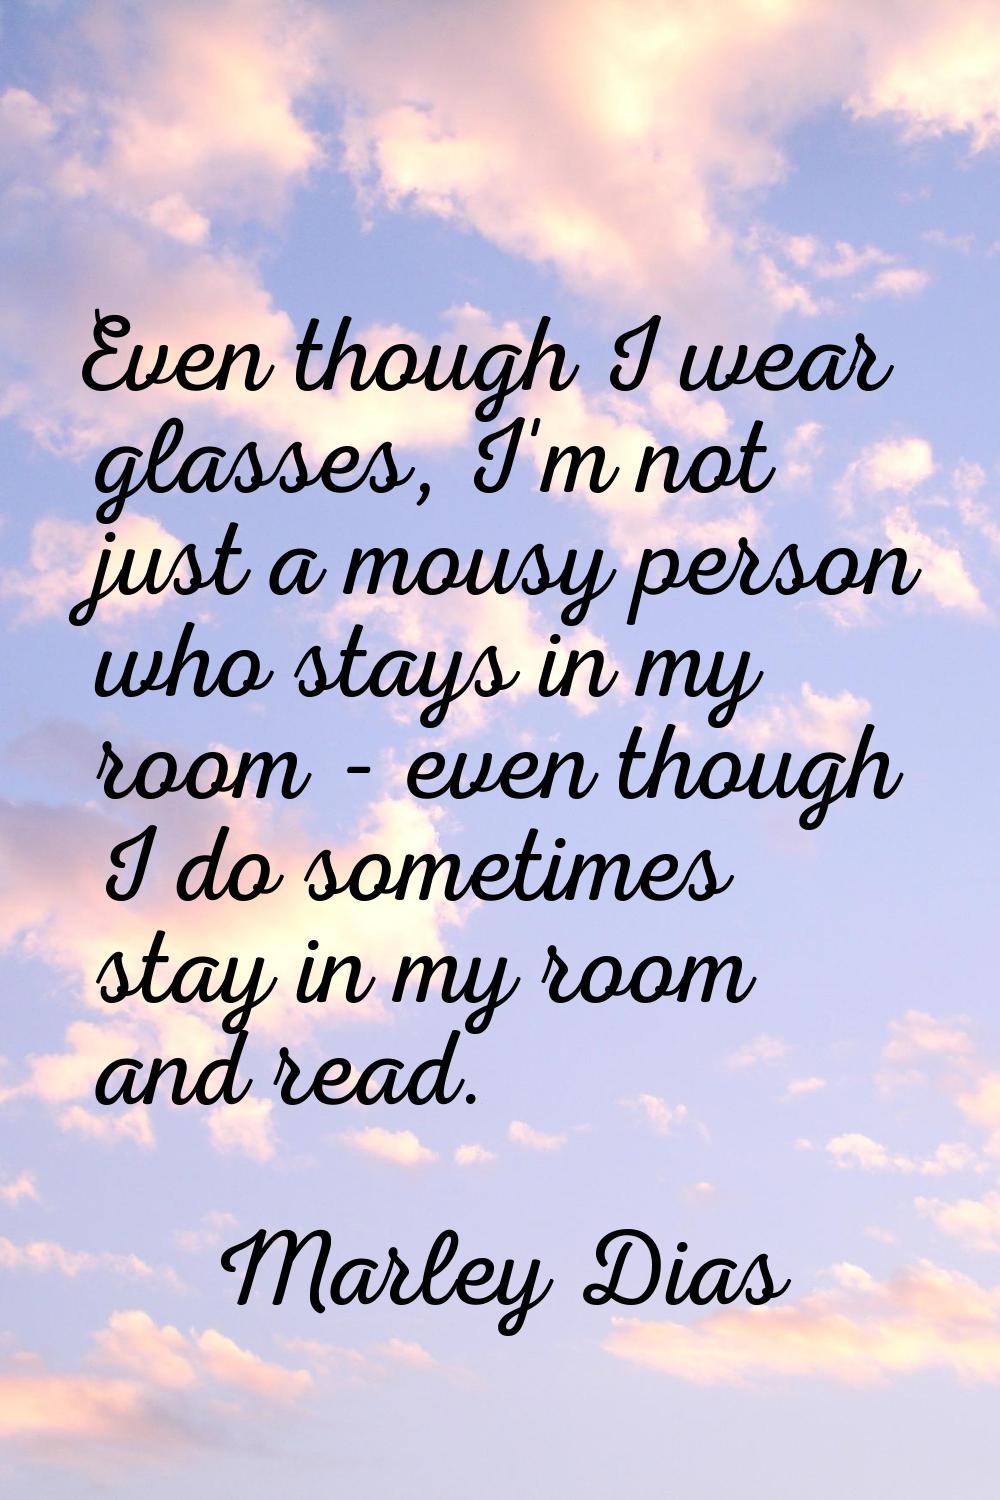 Even though I wear glasses, I'm not just a mousy person who stays in my room - even though I do som